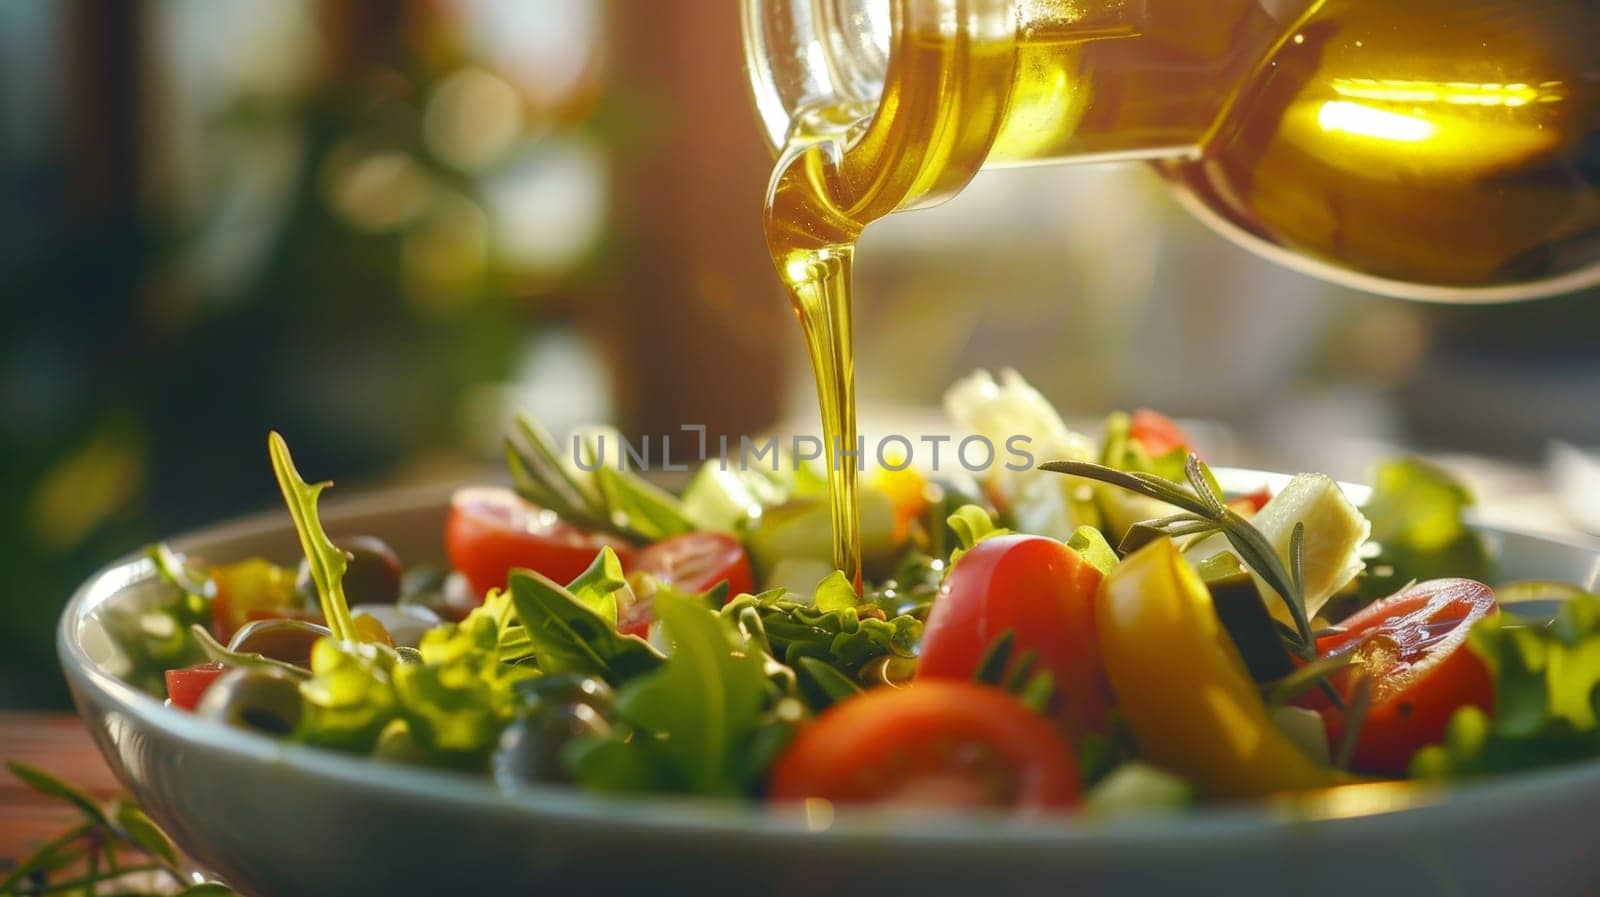 Olive oil salad, A bottle with olive oil pouring into salad, Pouring olive oil from bottle into plate with salad by nijieimu